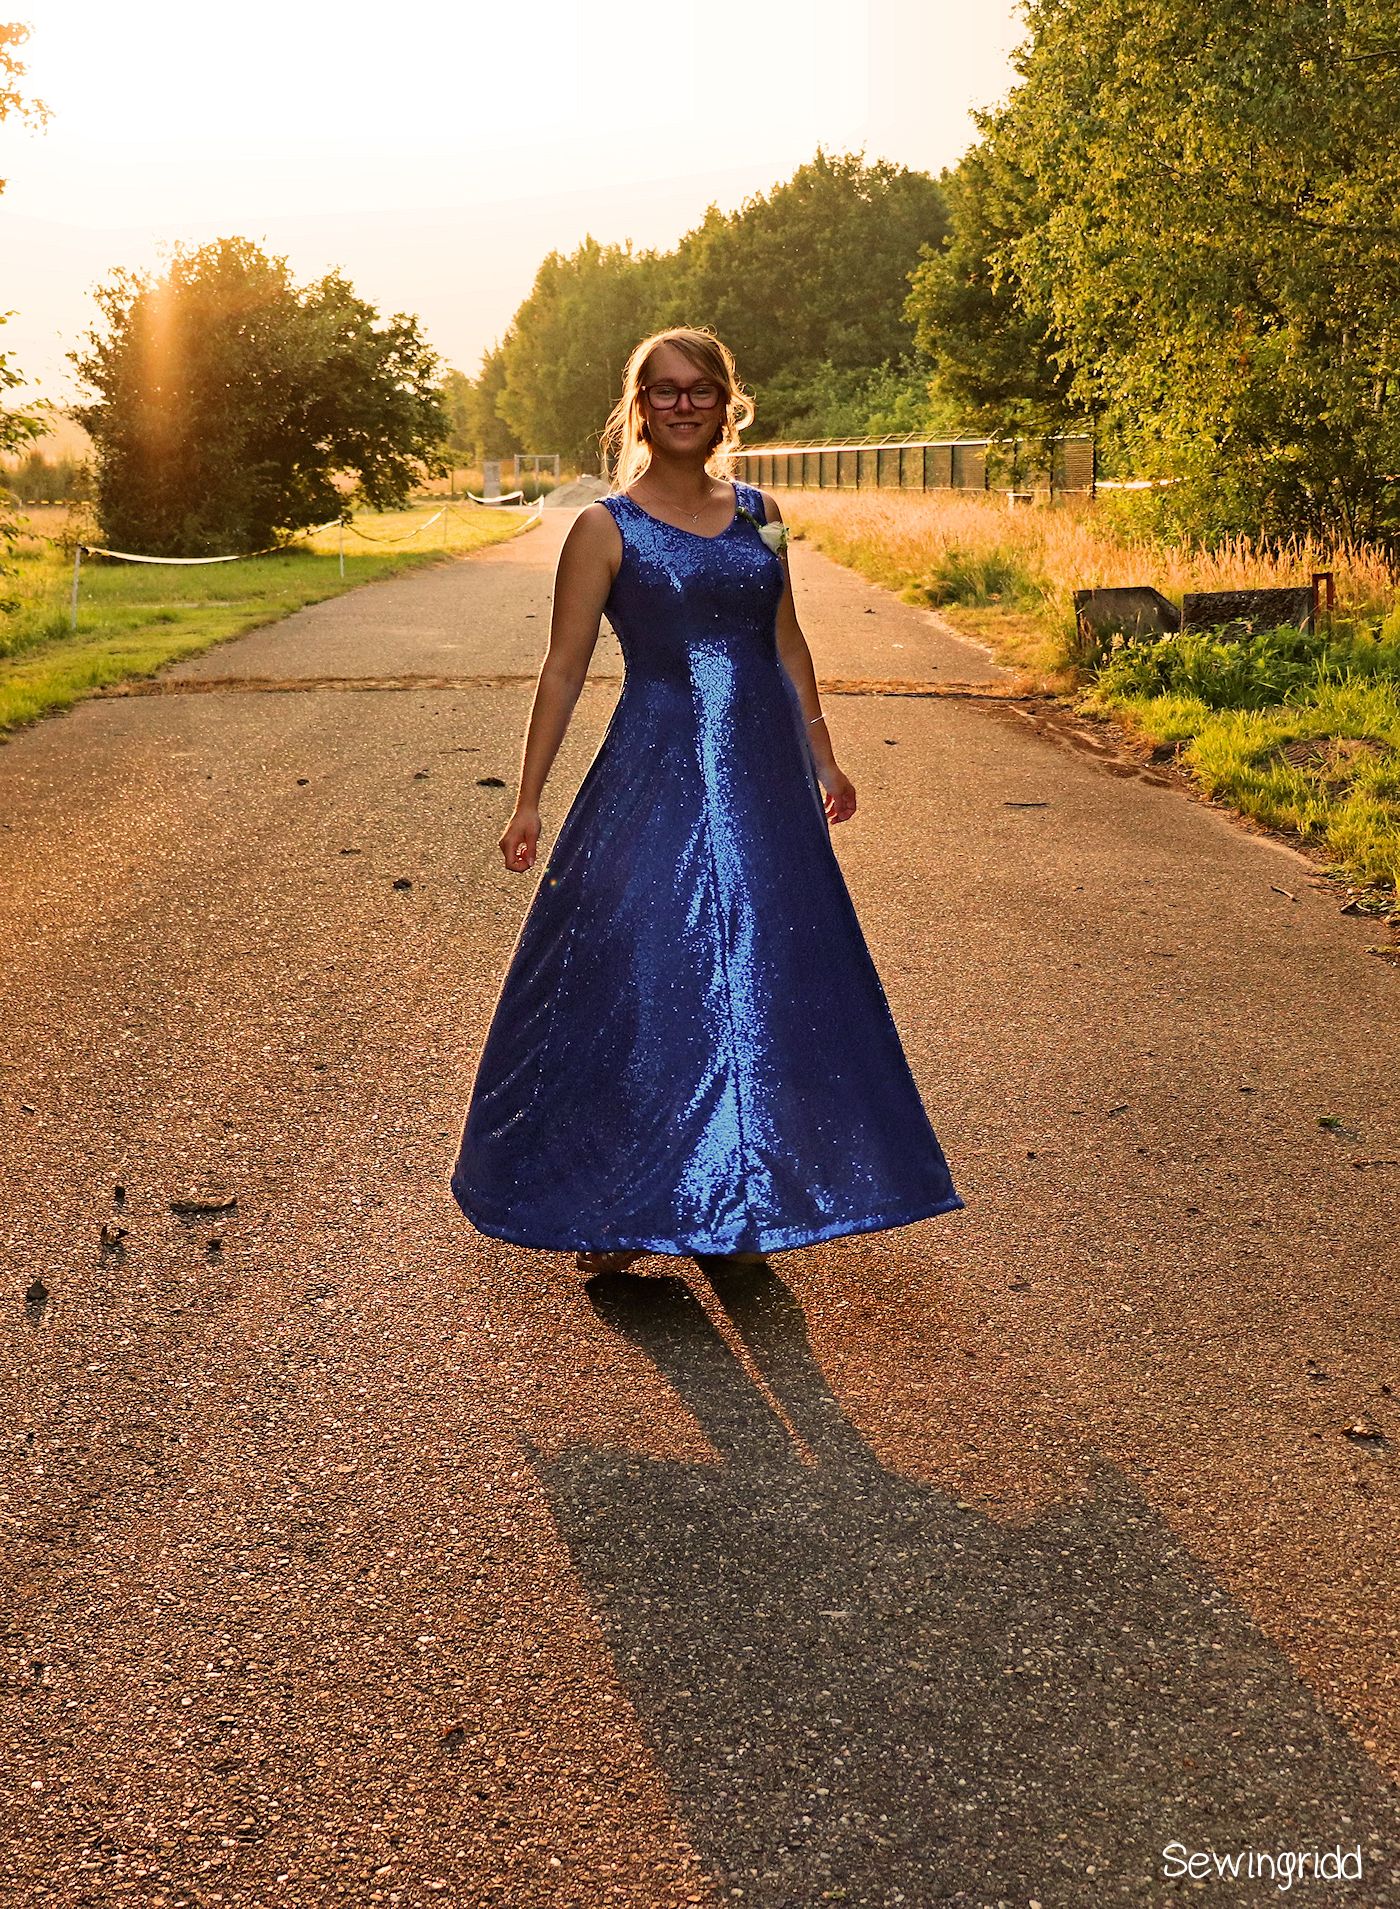 Butterick B6146 - Sequined gown stitched by Sewingridd